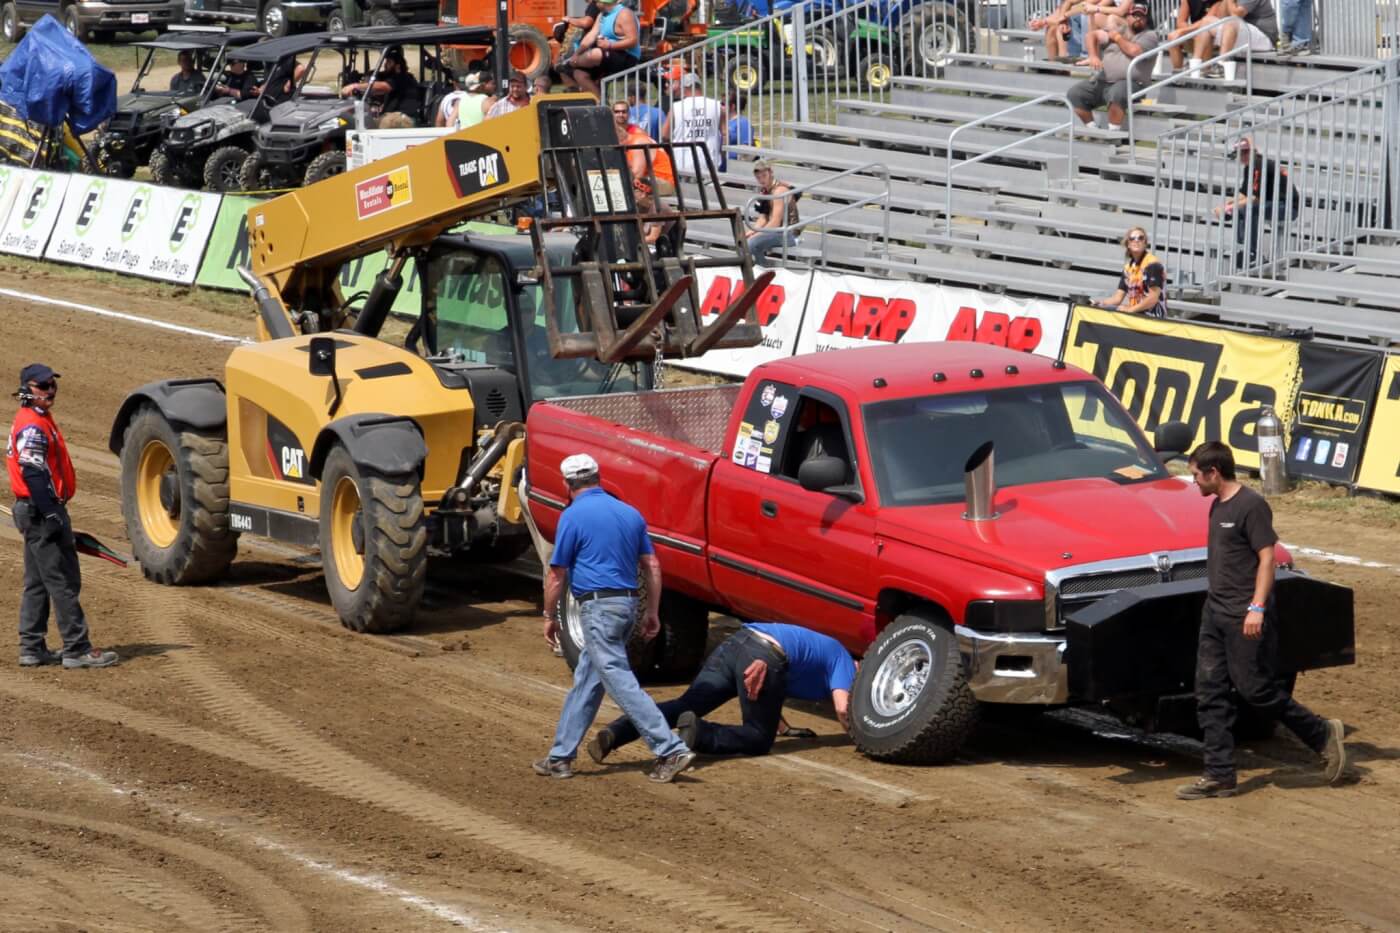 Bo Layne had a rough day in 2.6 Class qualifying on Friday when something broke in the front axle of his Dodge.